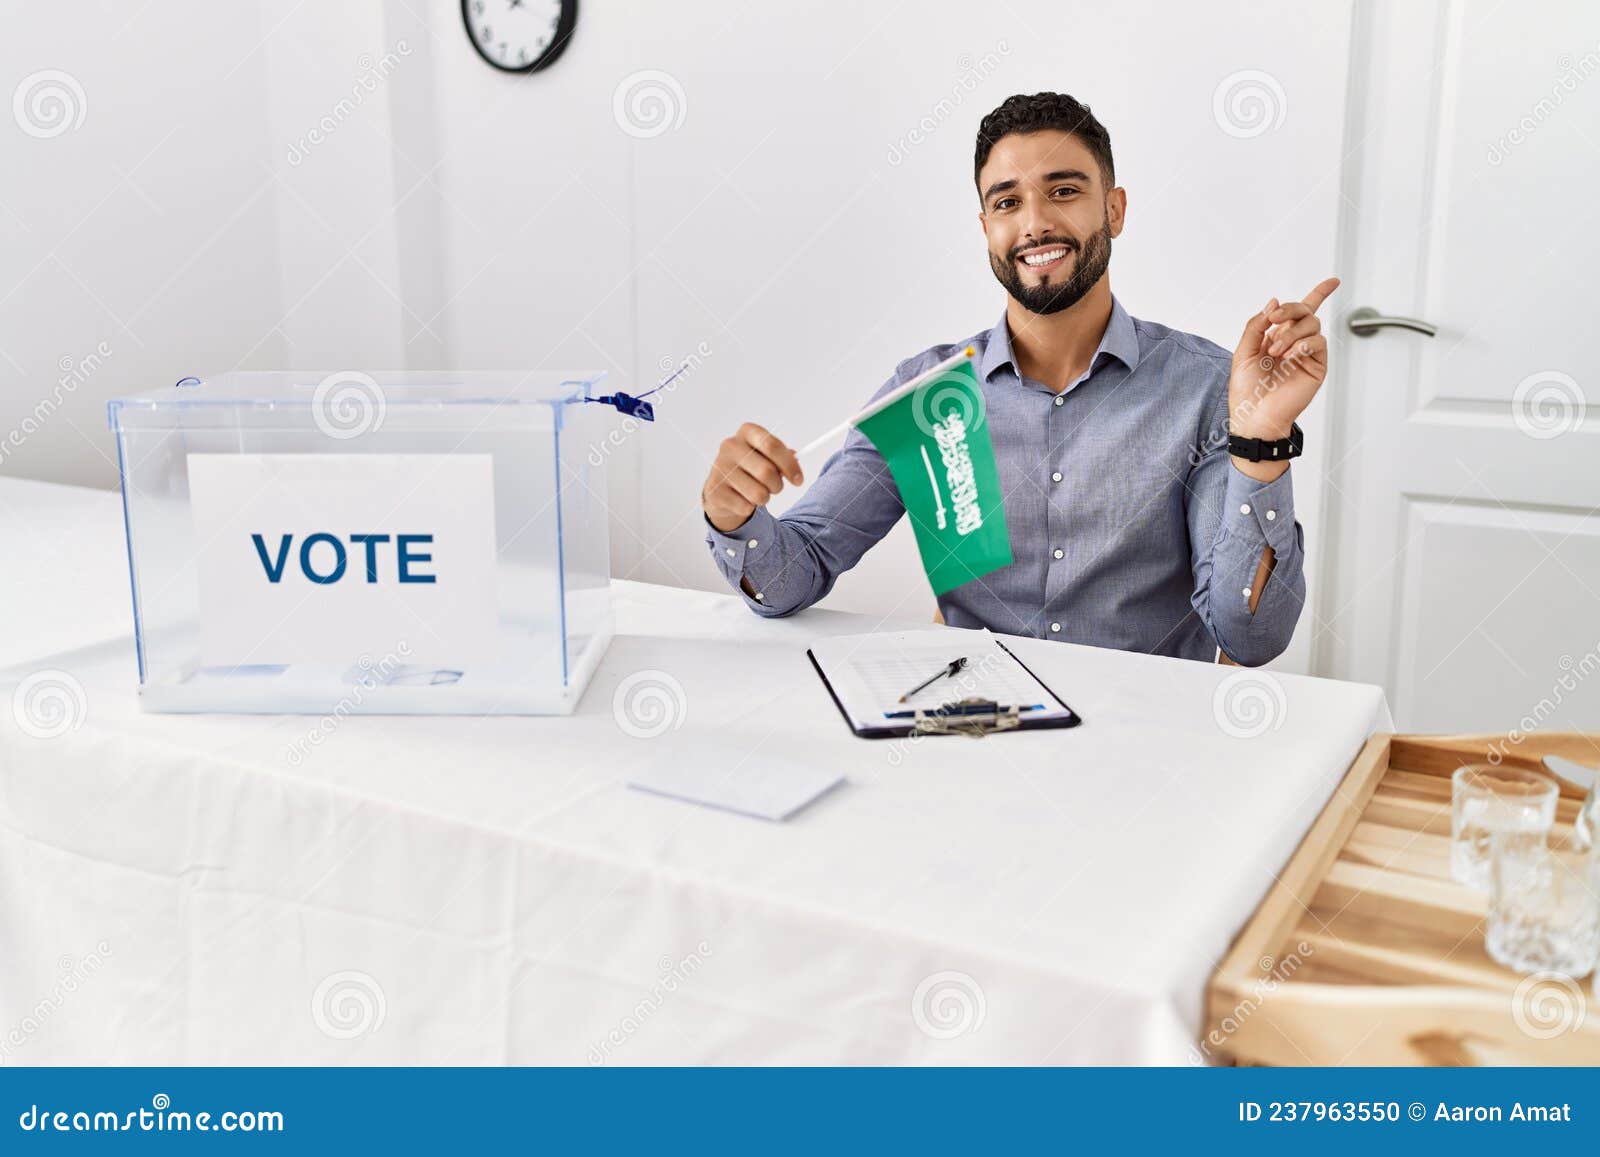 young handsome man with beard at political campaign election holding arabia saudita flag smiling happy pointing with hand and